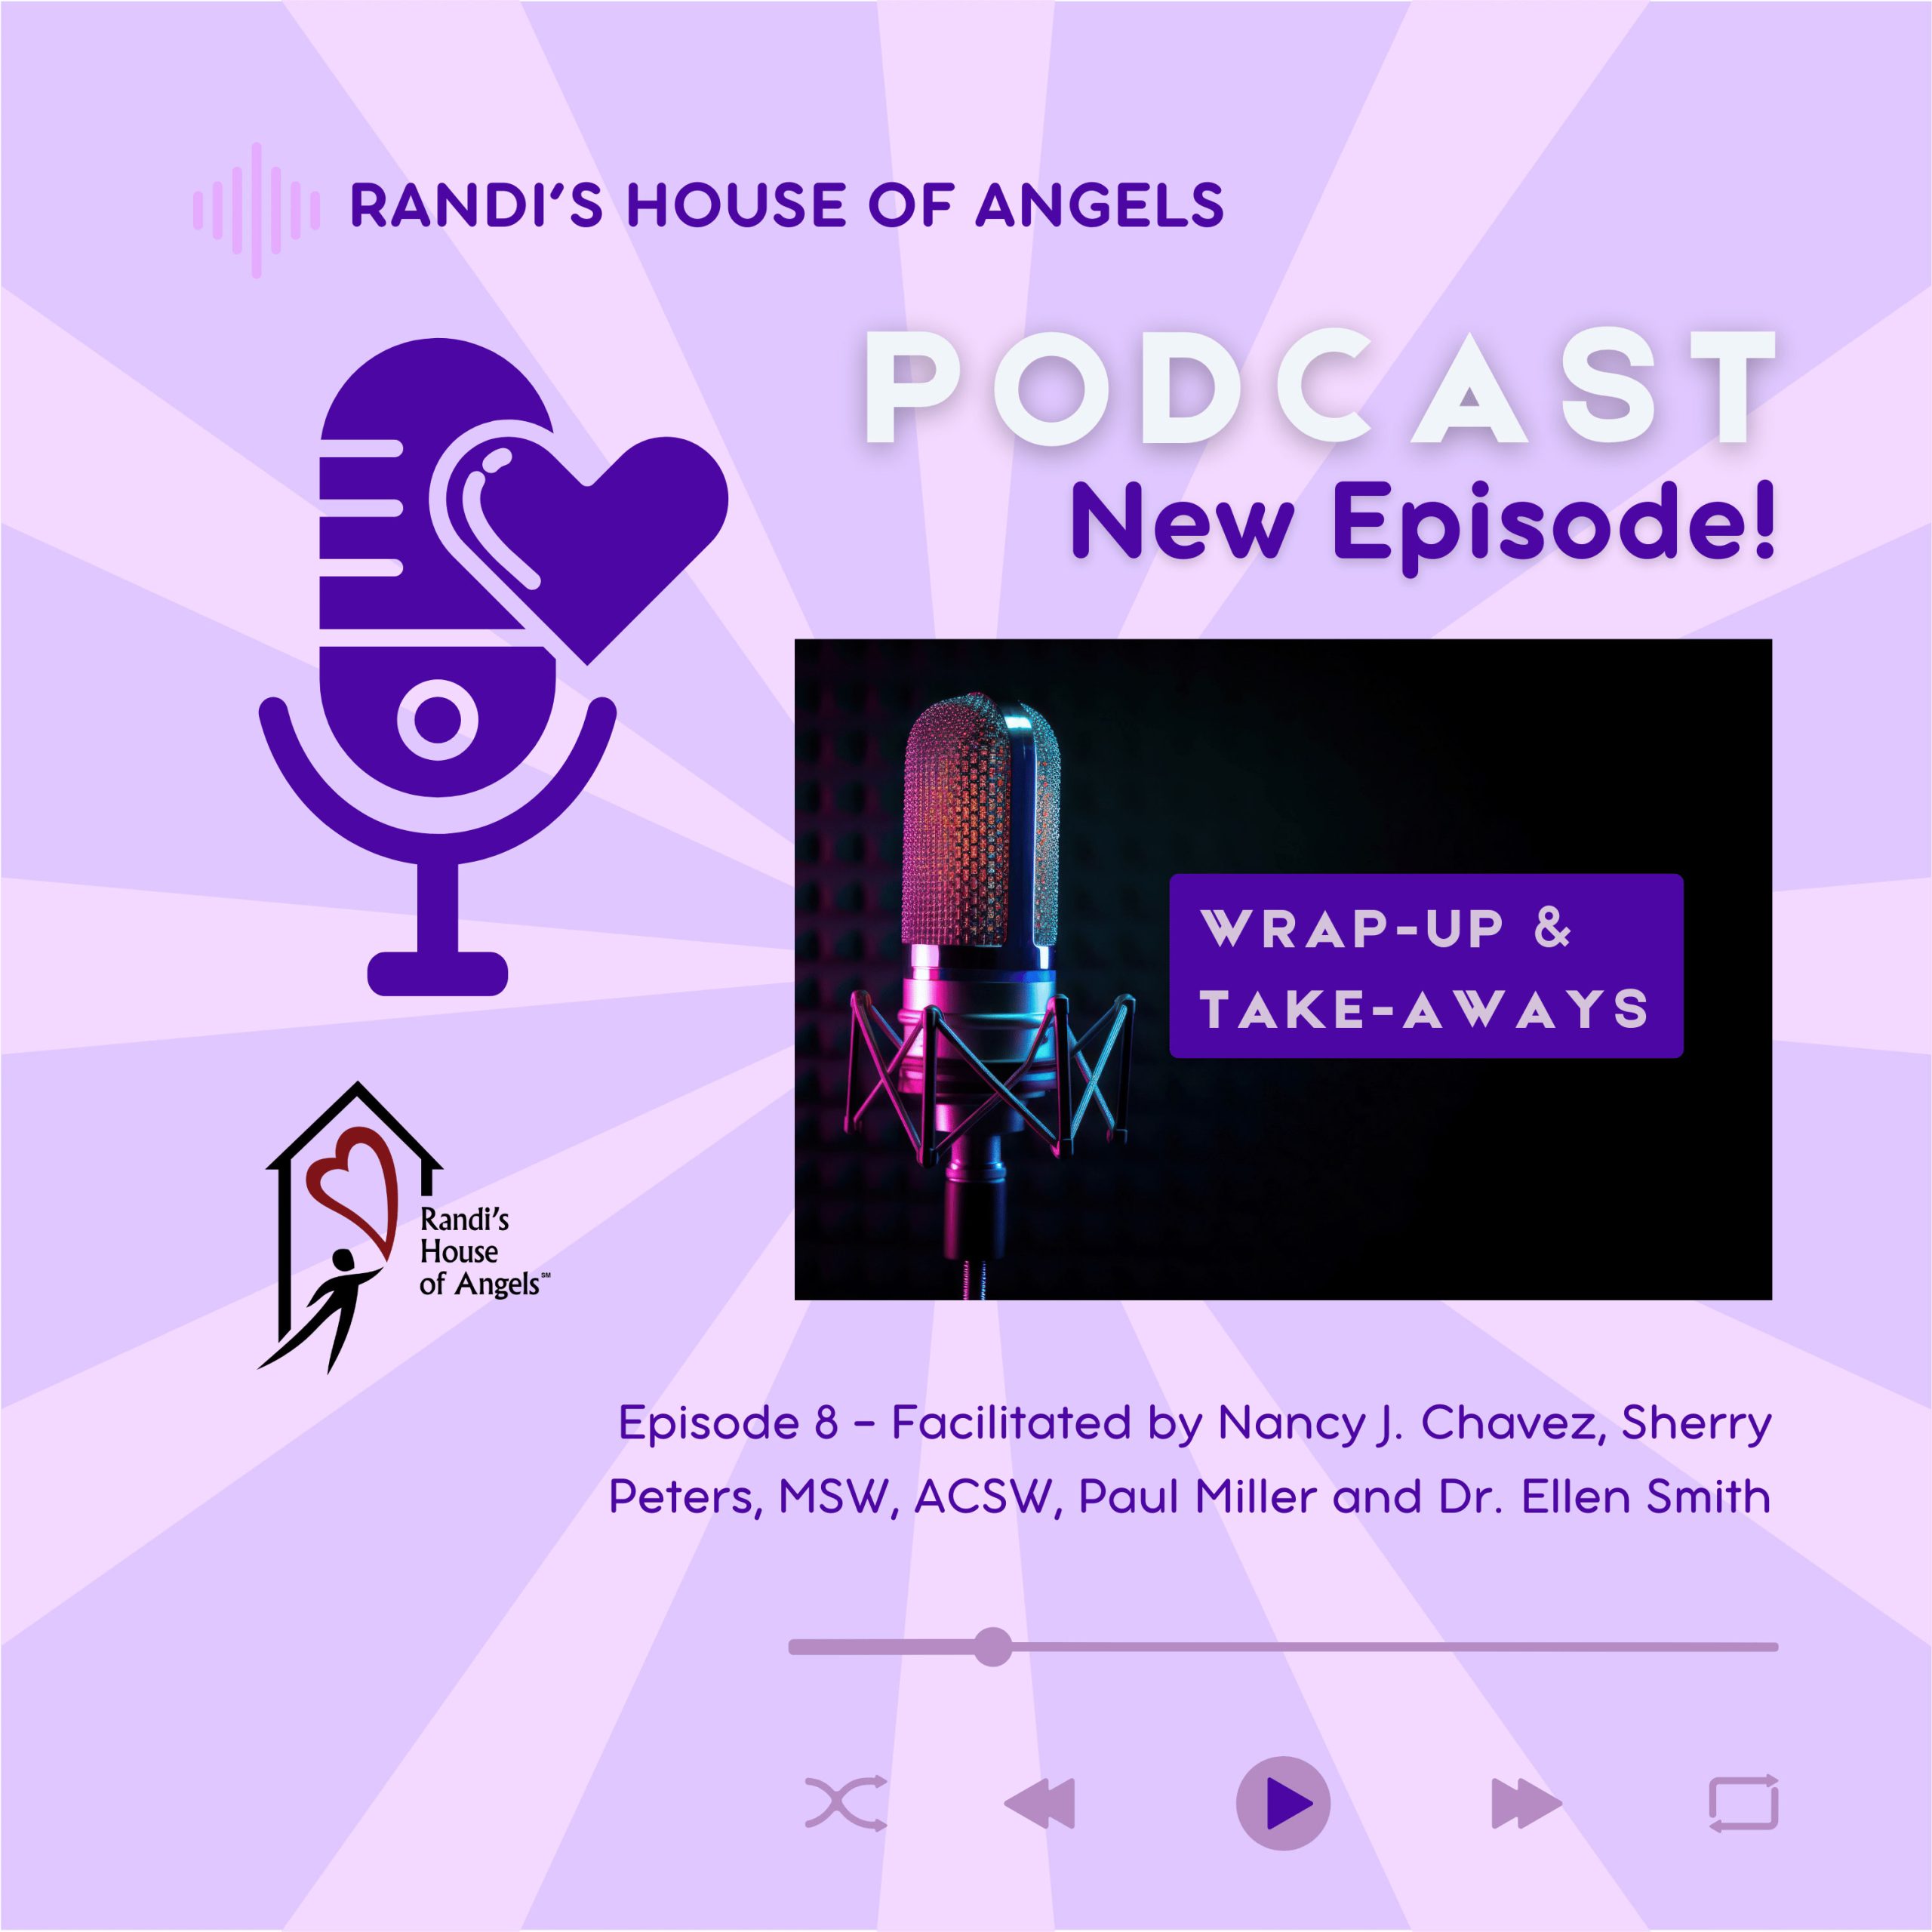 Randi's House of Angels (RHOA) Podcast Episode 8 - Wrap-Up and Take-Aways - cover art